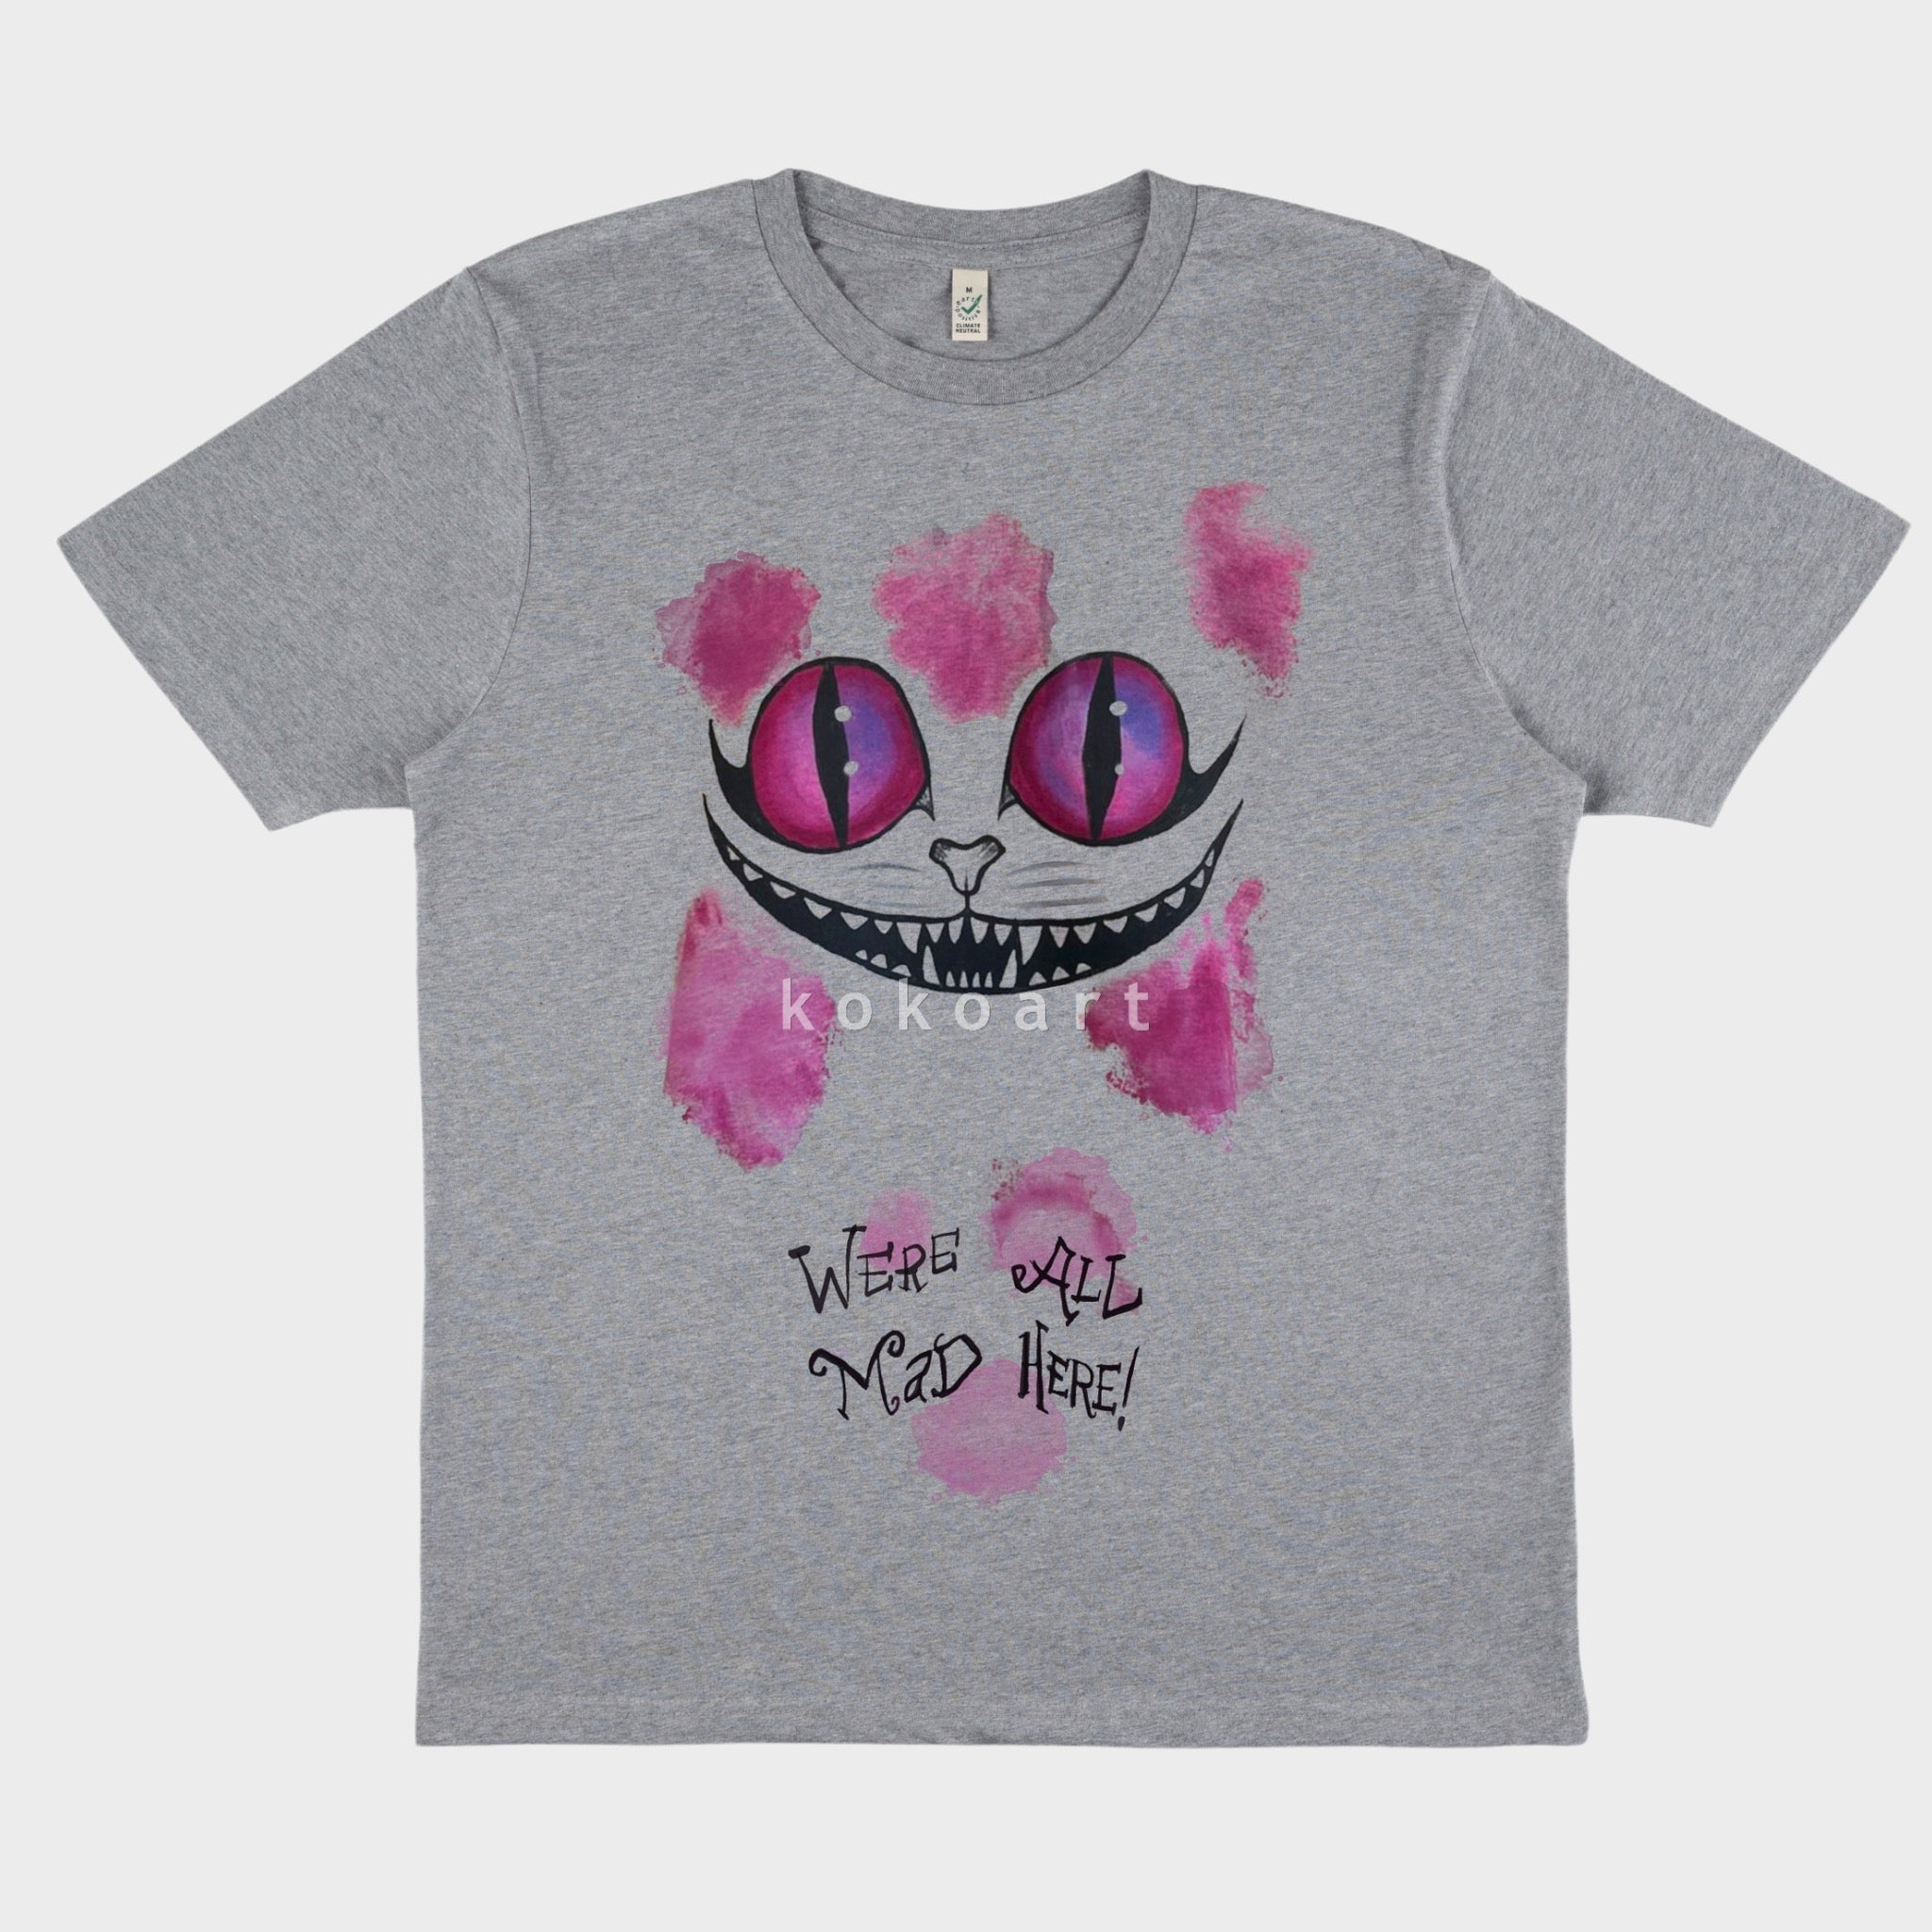 We’re all mad here - Hand painted Organic Cotton Clothing